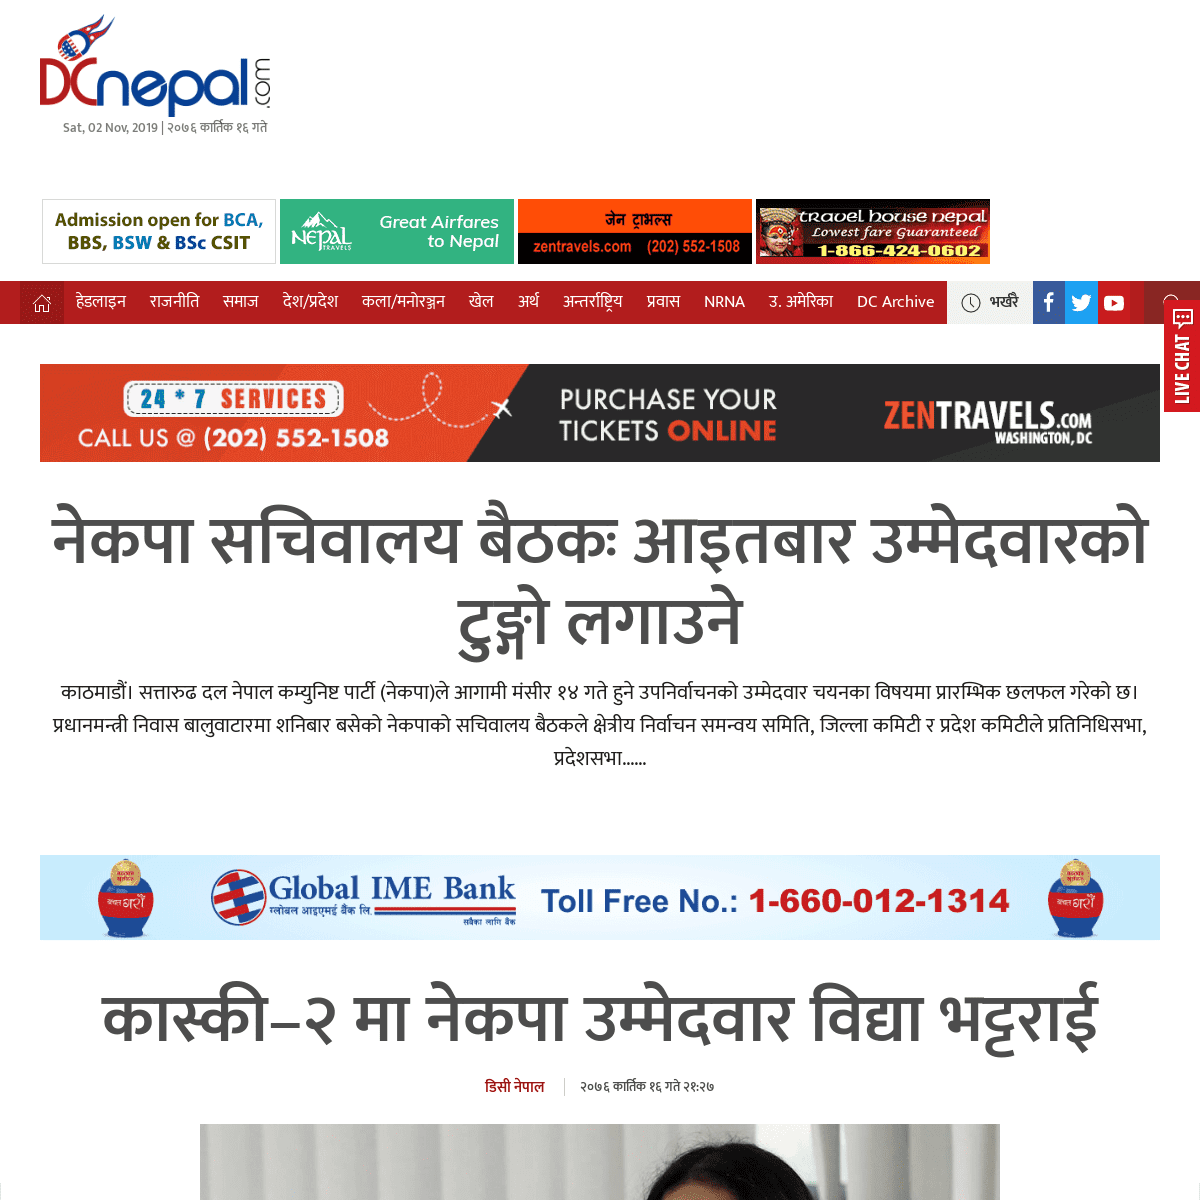 A complete backup of dcnepal.com